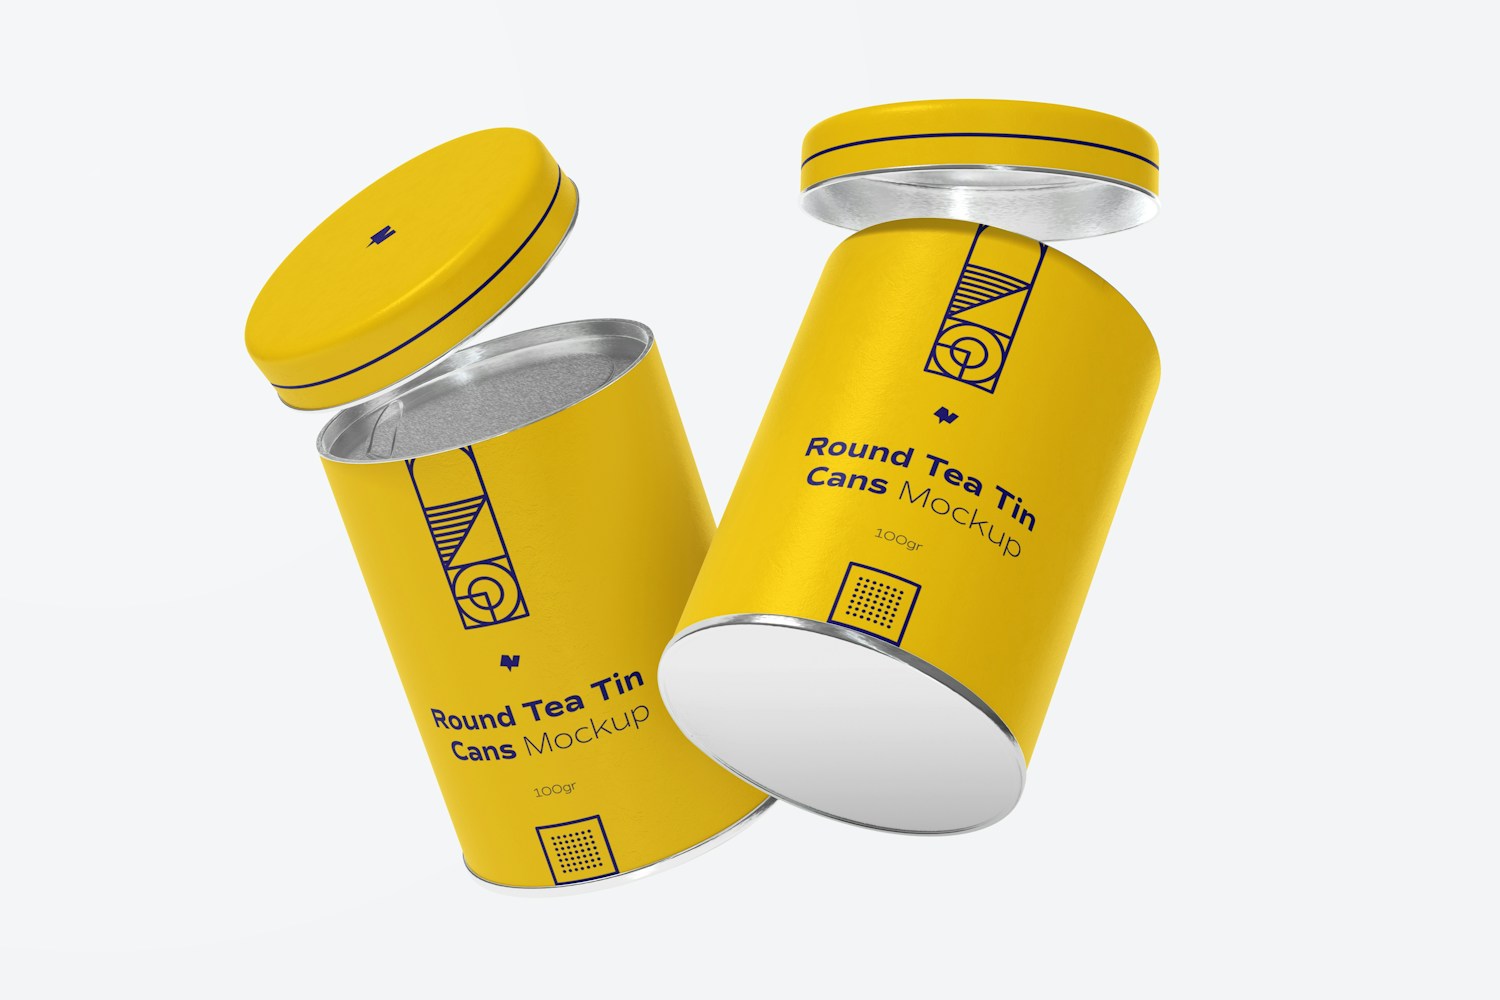 Round Tea Tin Cans Mockup, Floating